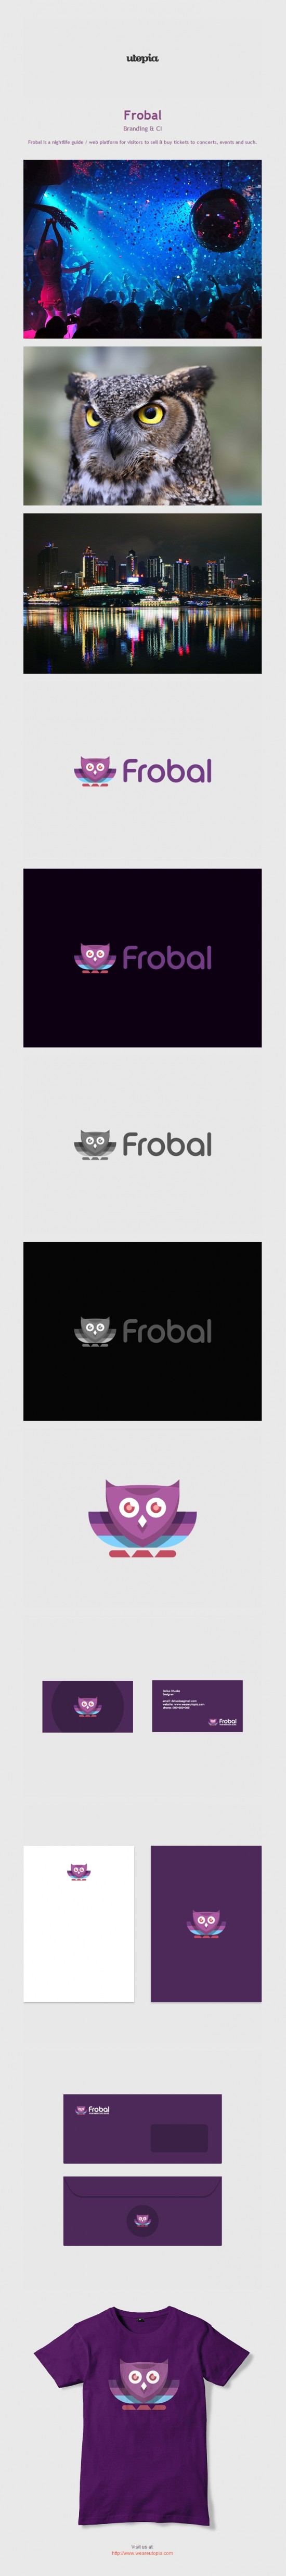 Frobal logo and corporate identity design by Utopia Branding Agency 